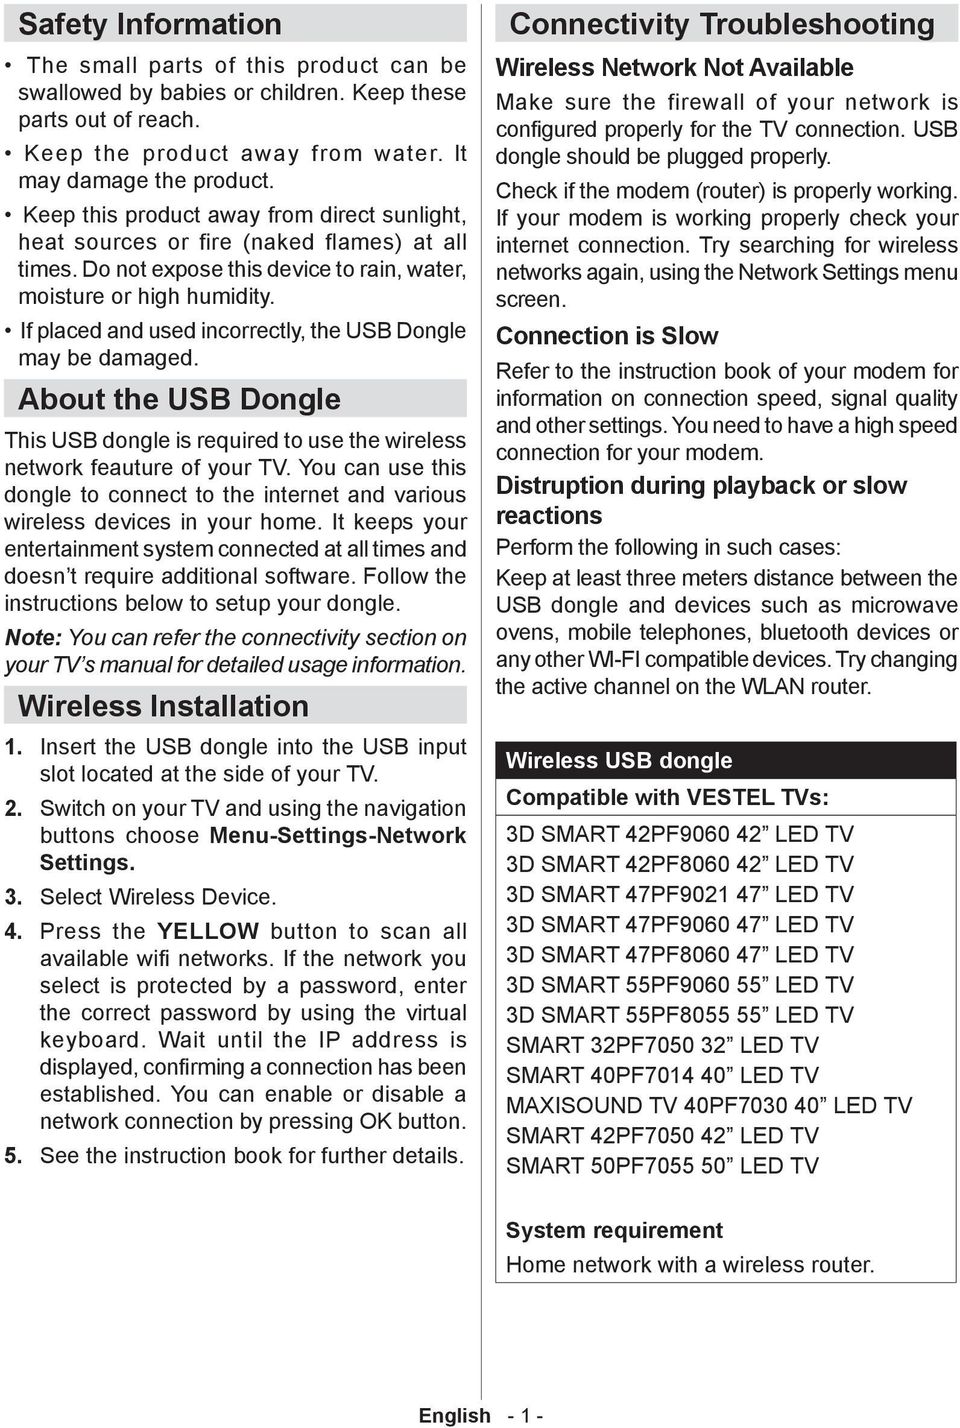 If placed and used incorrectly, the USB Dongle may be damaged. About the USB Dongle This USB dongle is required to use the wireless network feauture of your TV.